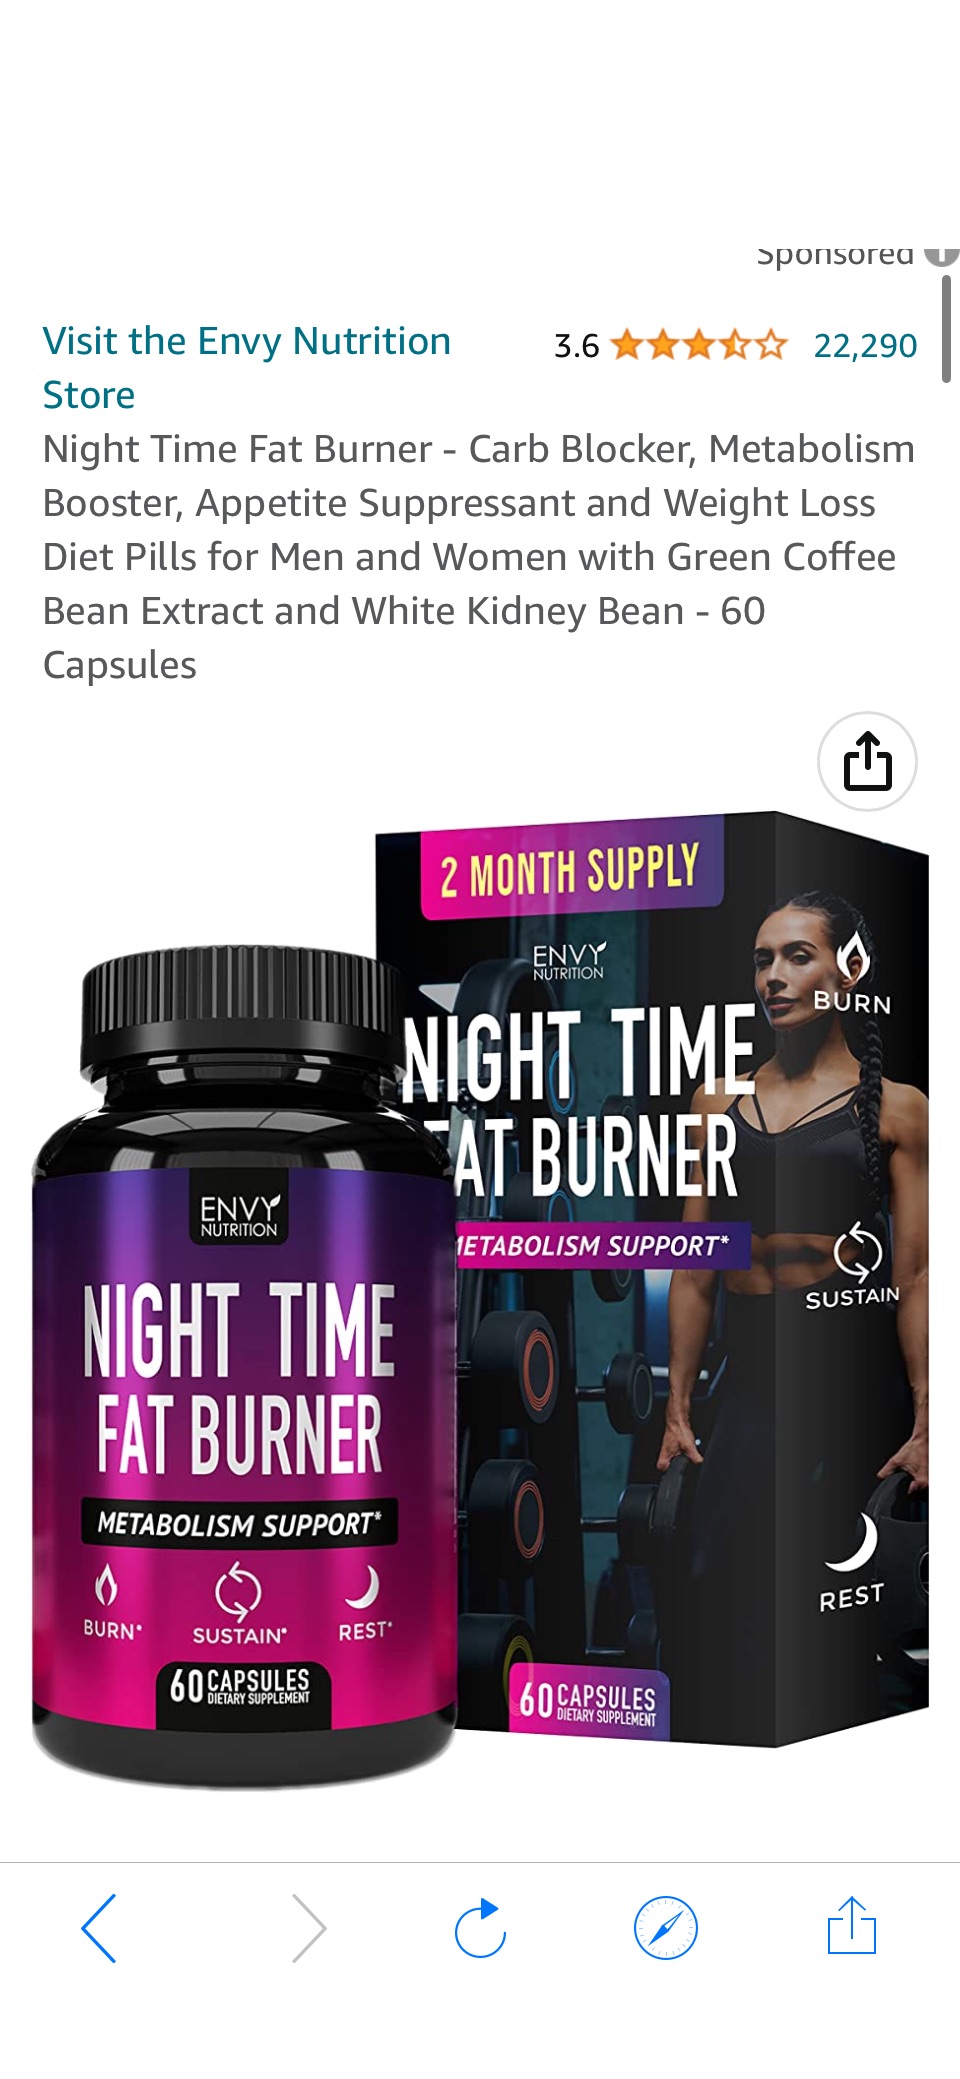 Amazon.com: Night Time Fat Burner - Carb Blocker, Metabolism Booster, Appetite Suppressant and Weight Loss Diet Pills for Men and Women with Green原价23.87